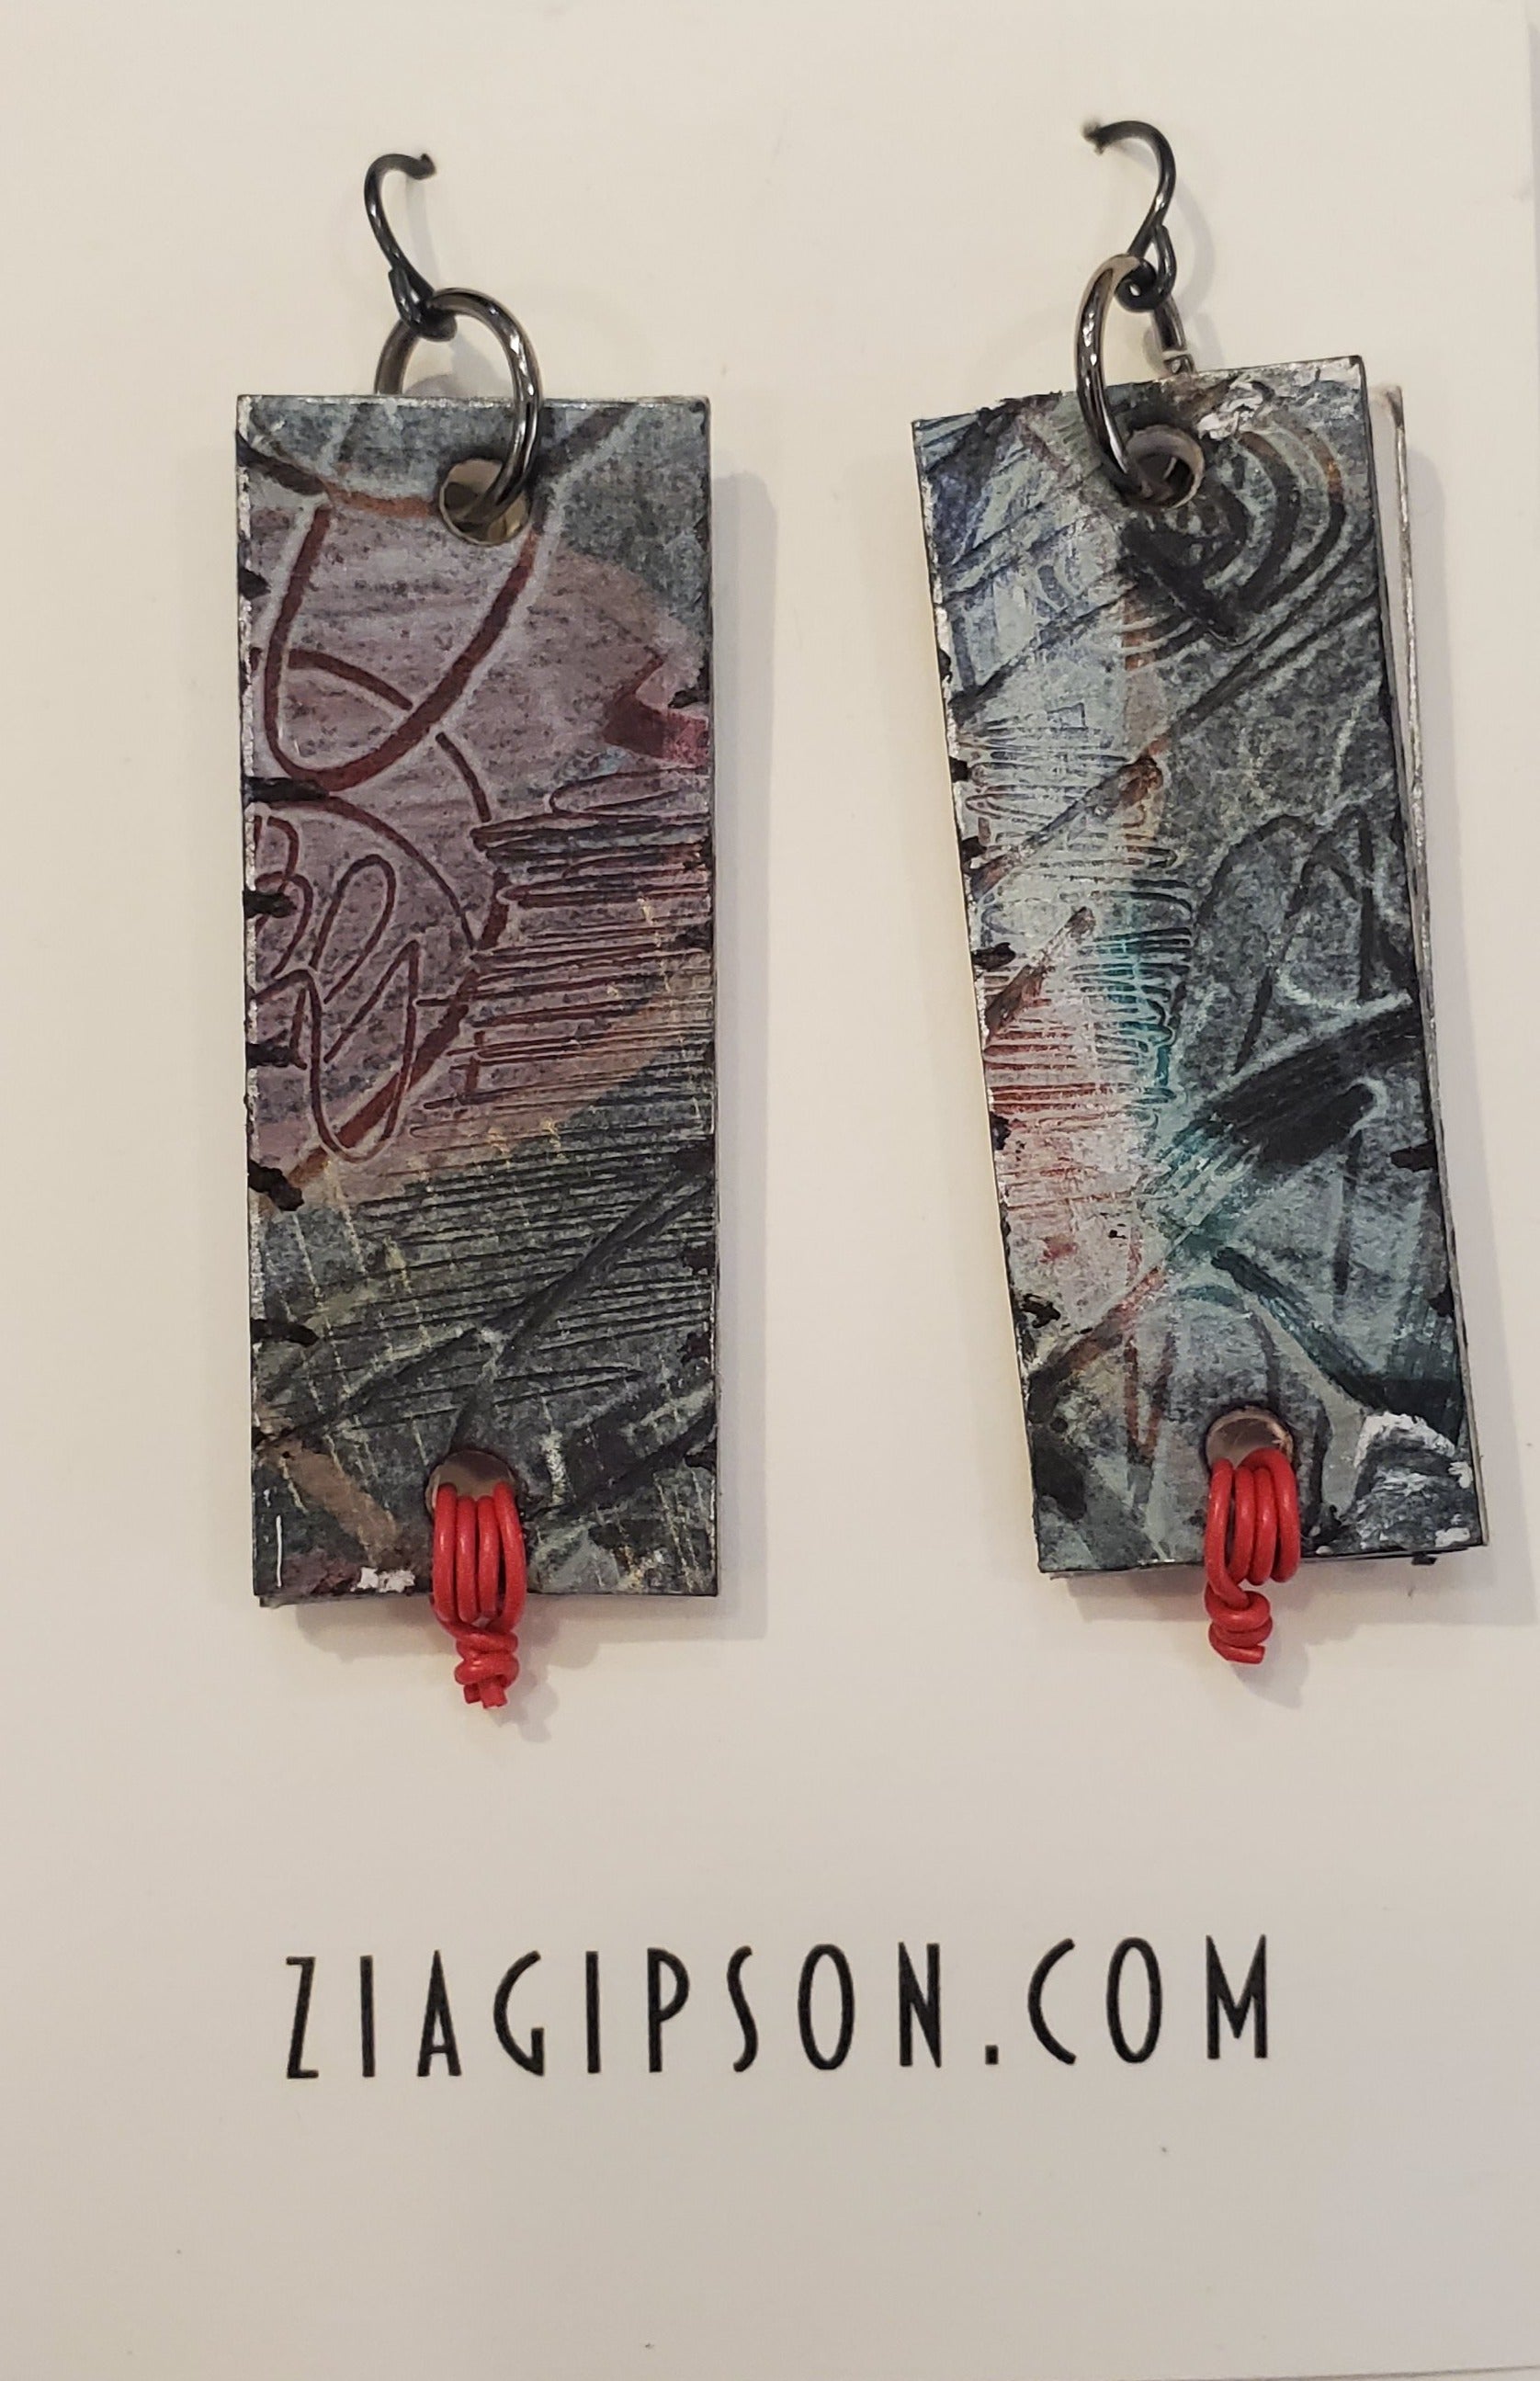 Grey Silver and Red Rectangle Earrings by Zia Gipson